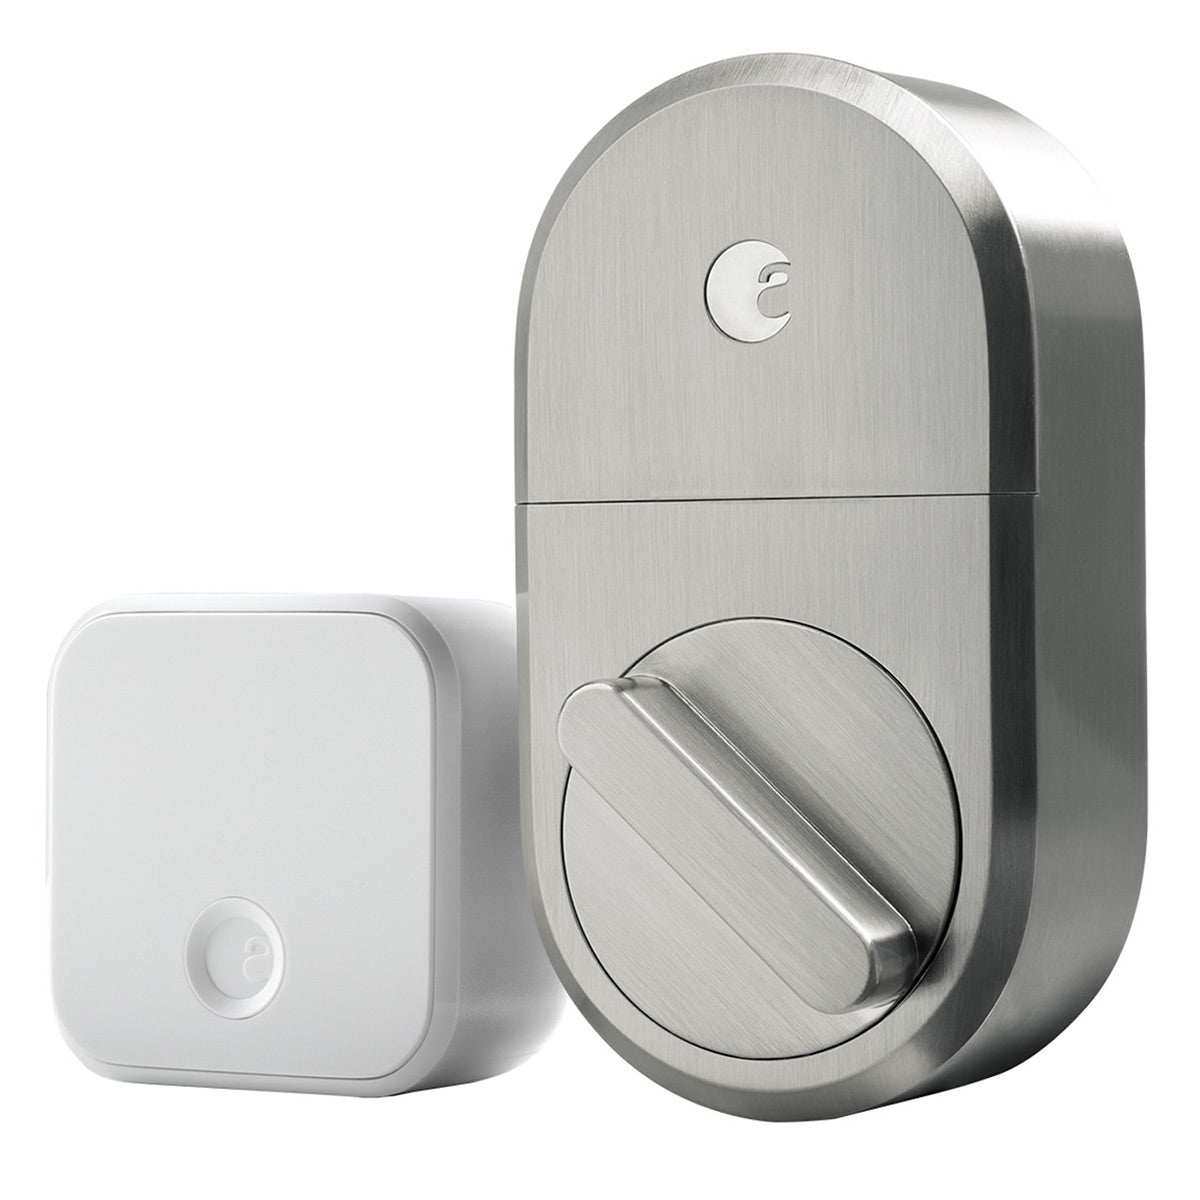 August Home Smart Lock with Connect Wi-Fi Bridge (Satin Nickel)